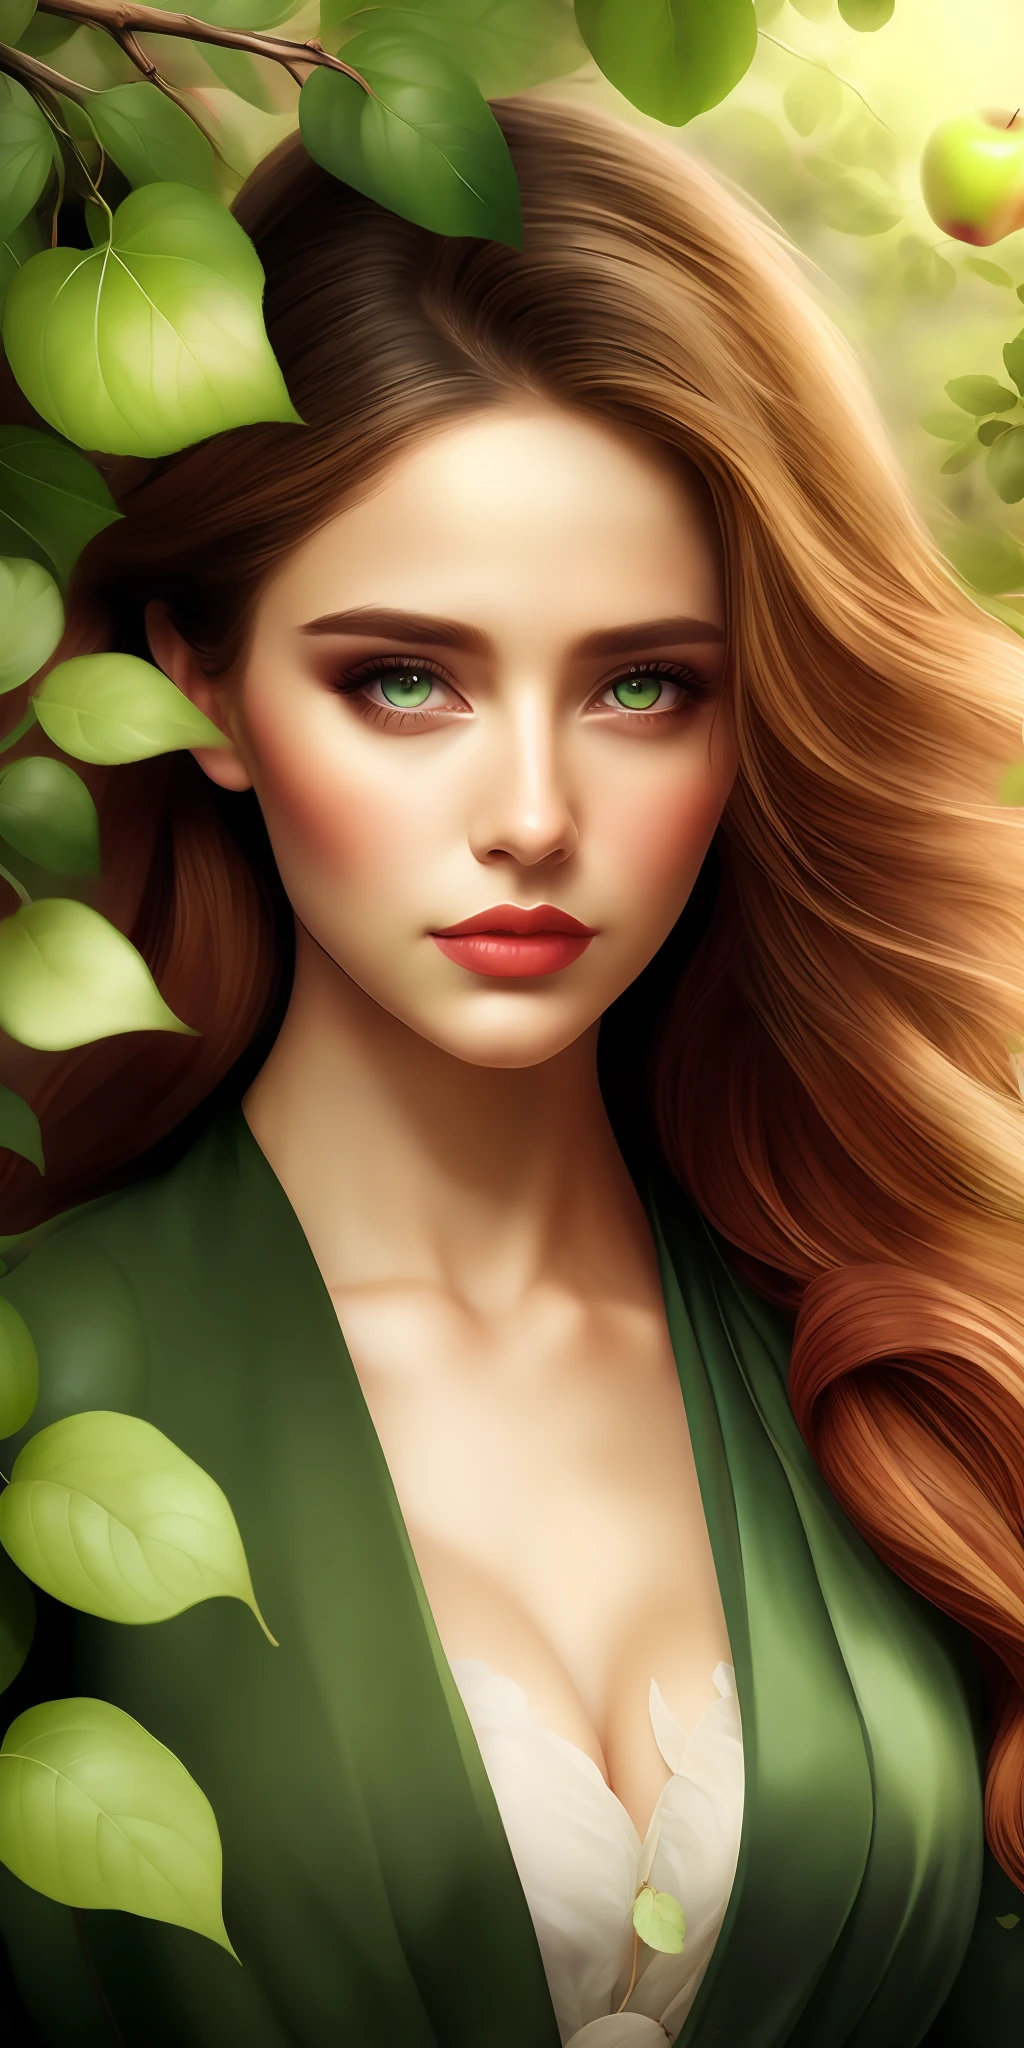 Best quality,highest resolution,8k, artistic illustration, beautiful portrait, masterpiece, most beautiful woman,most beautiful girl, greedy eyes,dressed in leaves, dressed in green leaves,the most beautiful girl in profile in front of an apple tree, greedy eyes,,an apple tree,apples in its branches